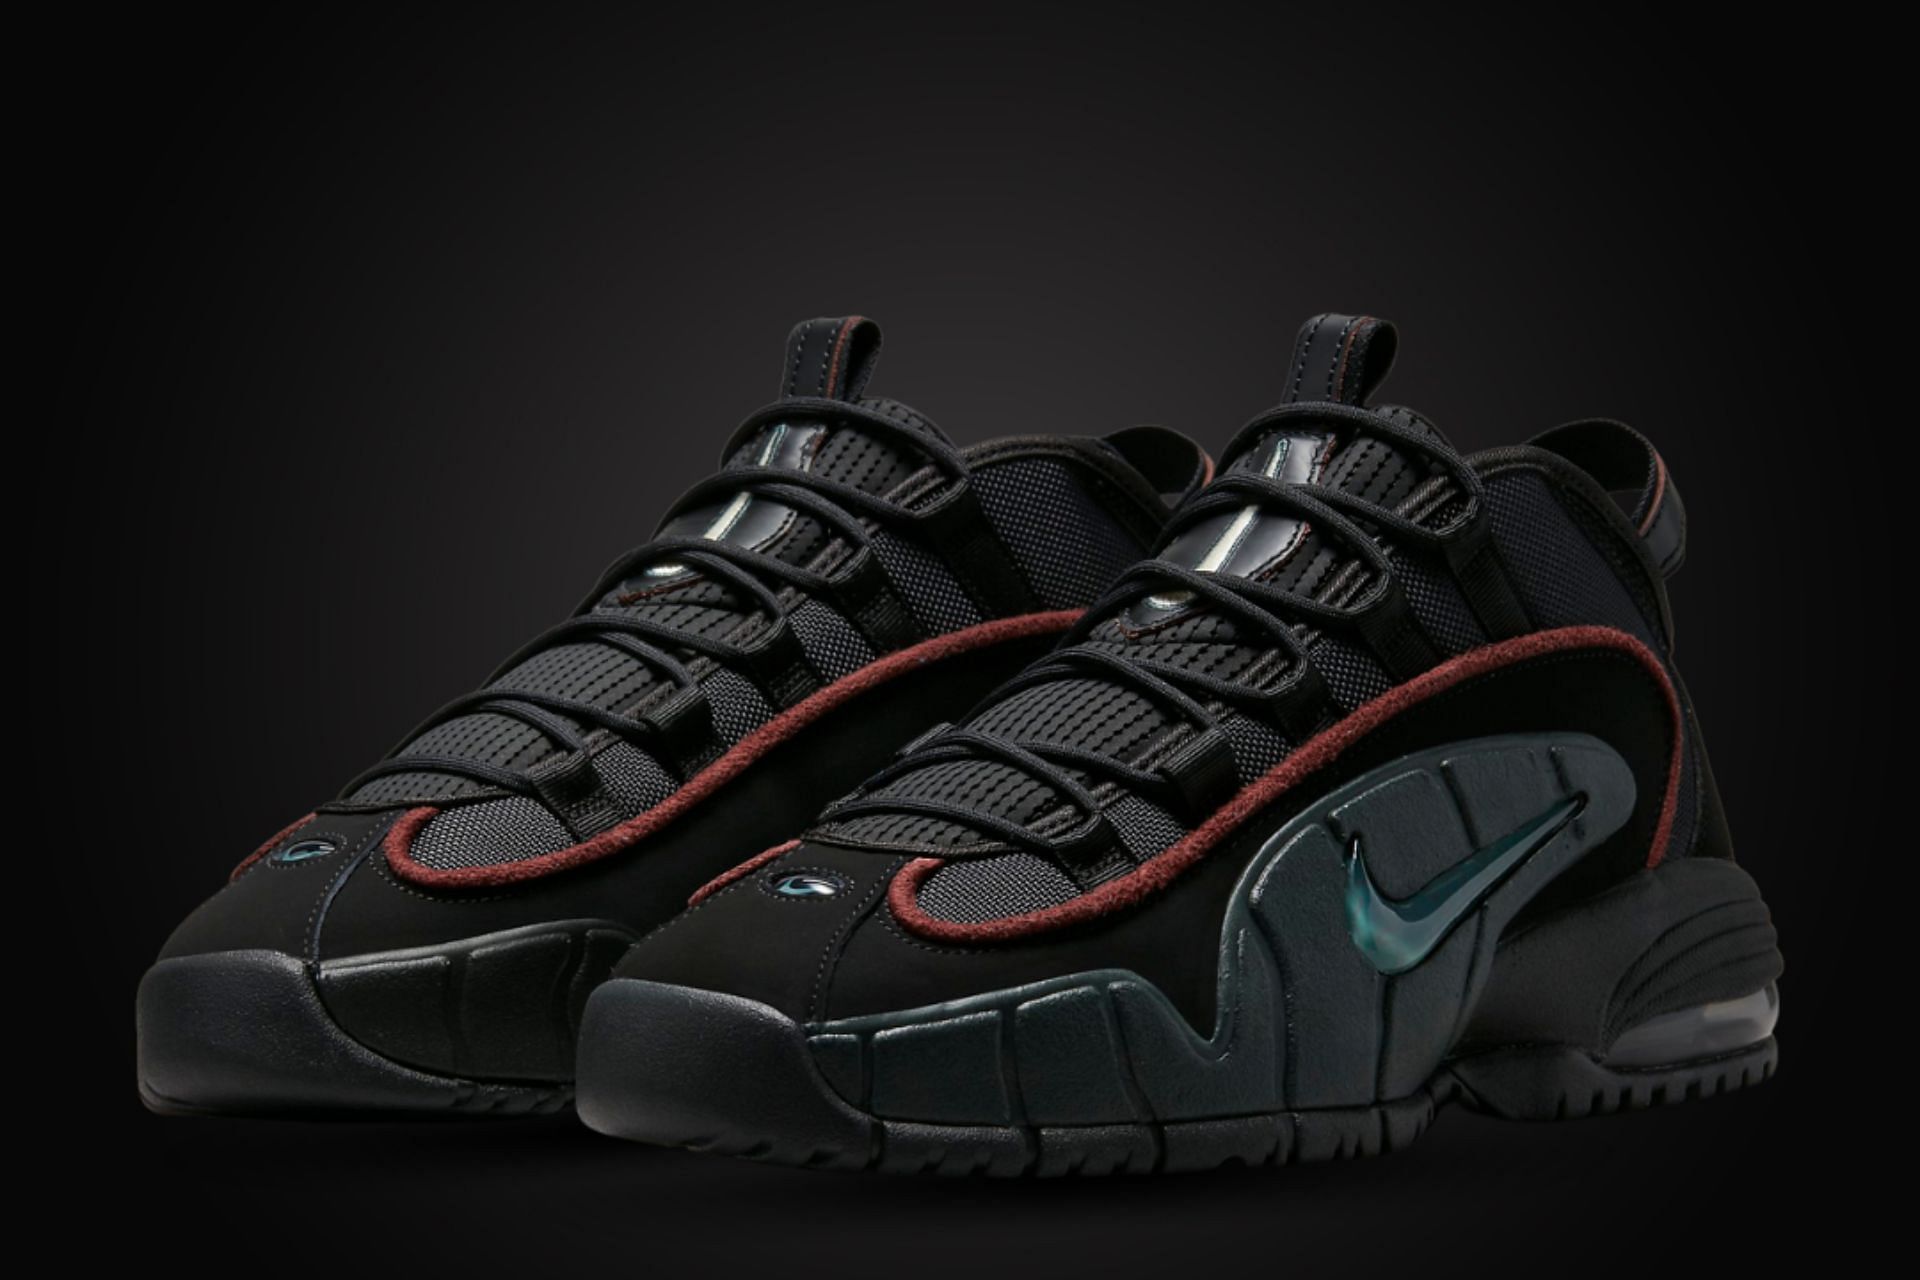 Nike Air Max Penny 1 Faded Spruce shoes (Image via Nike)